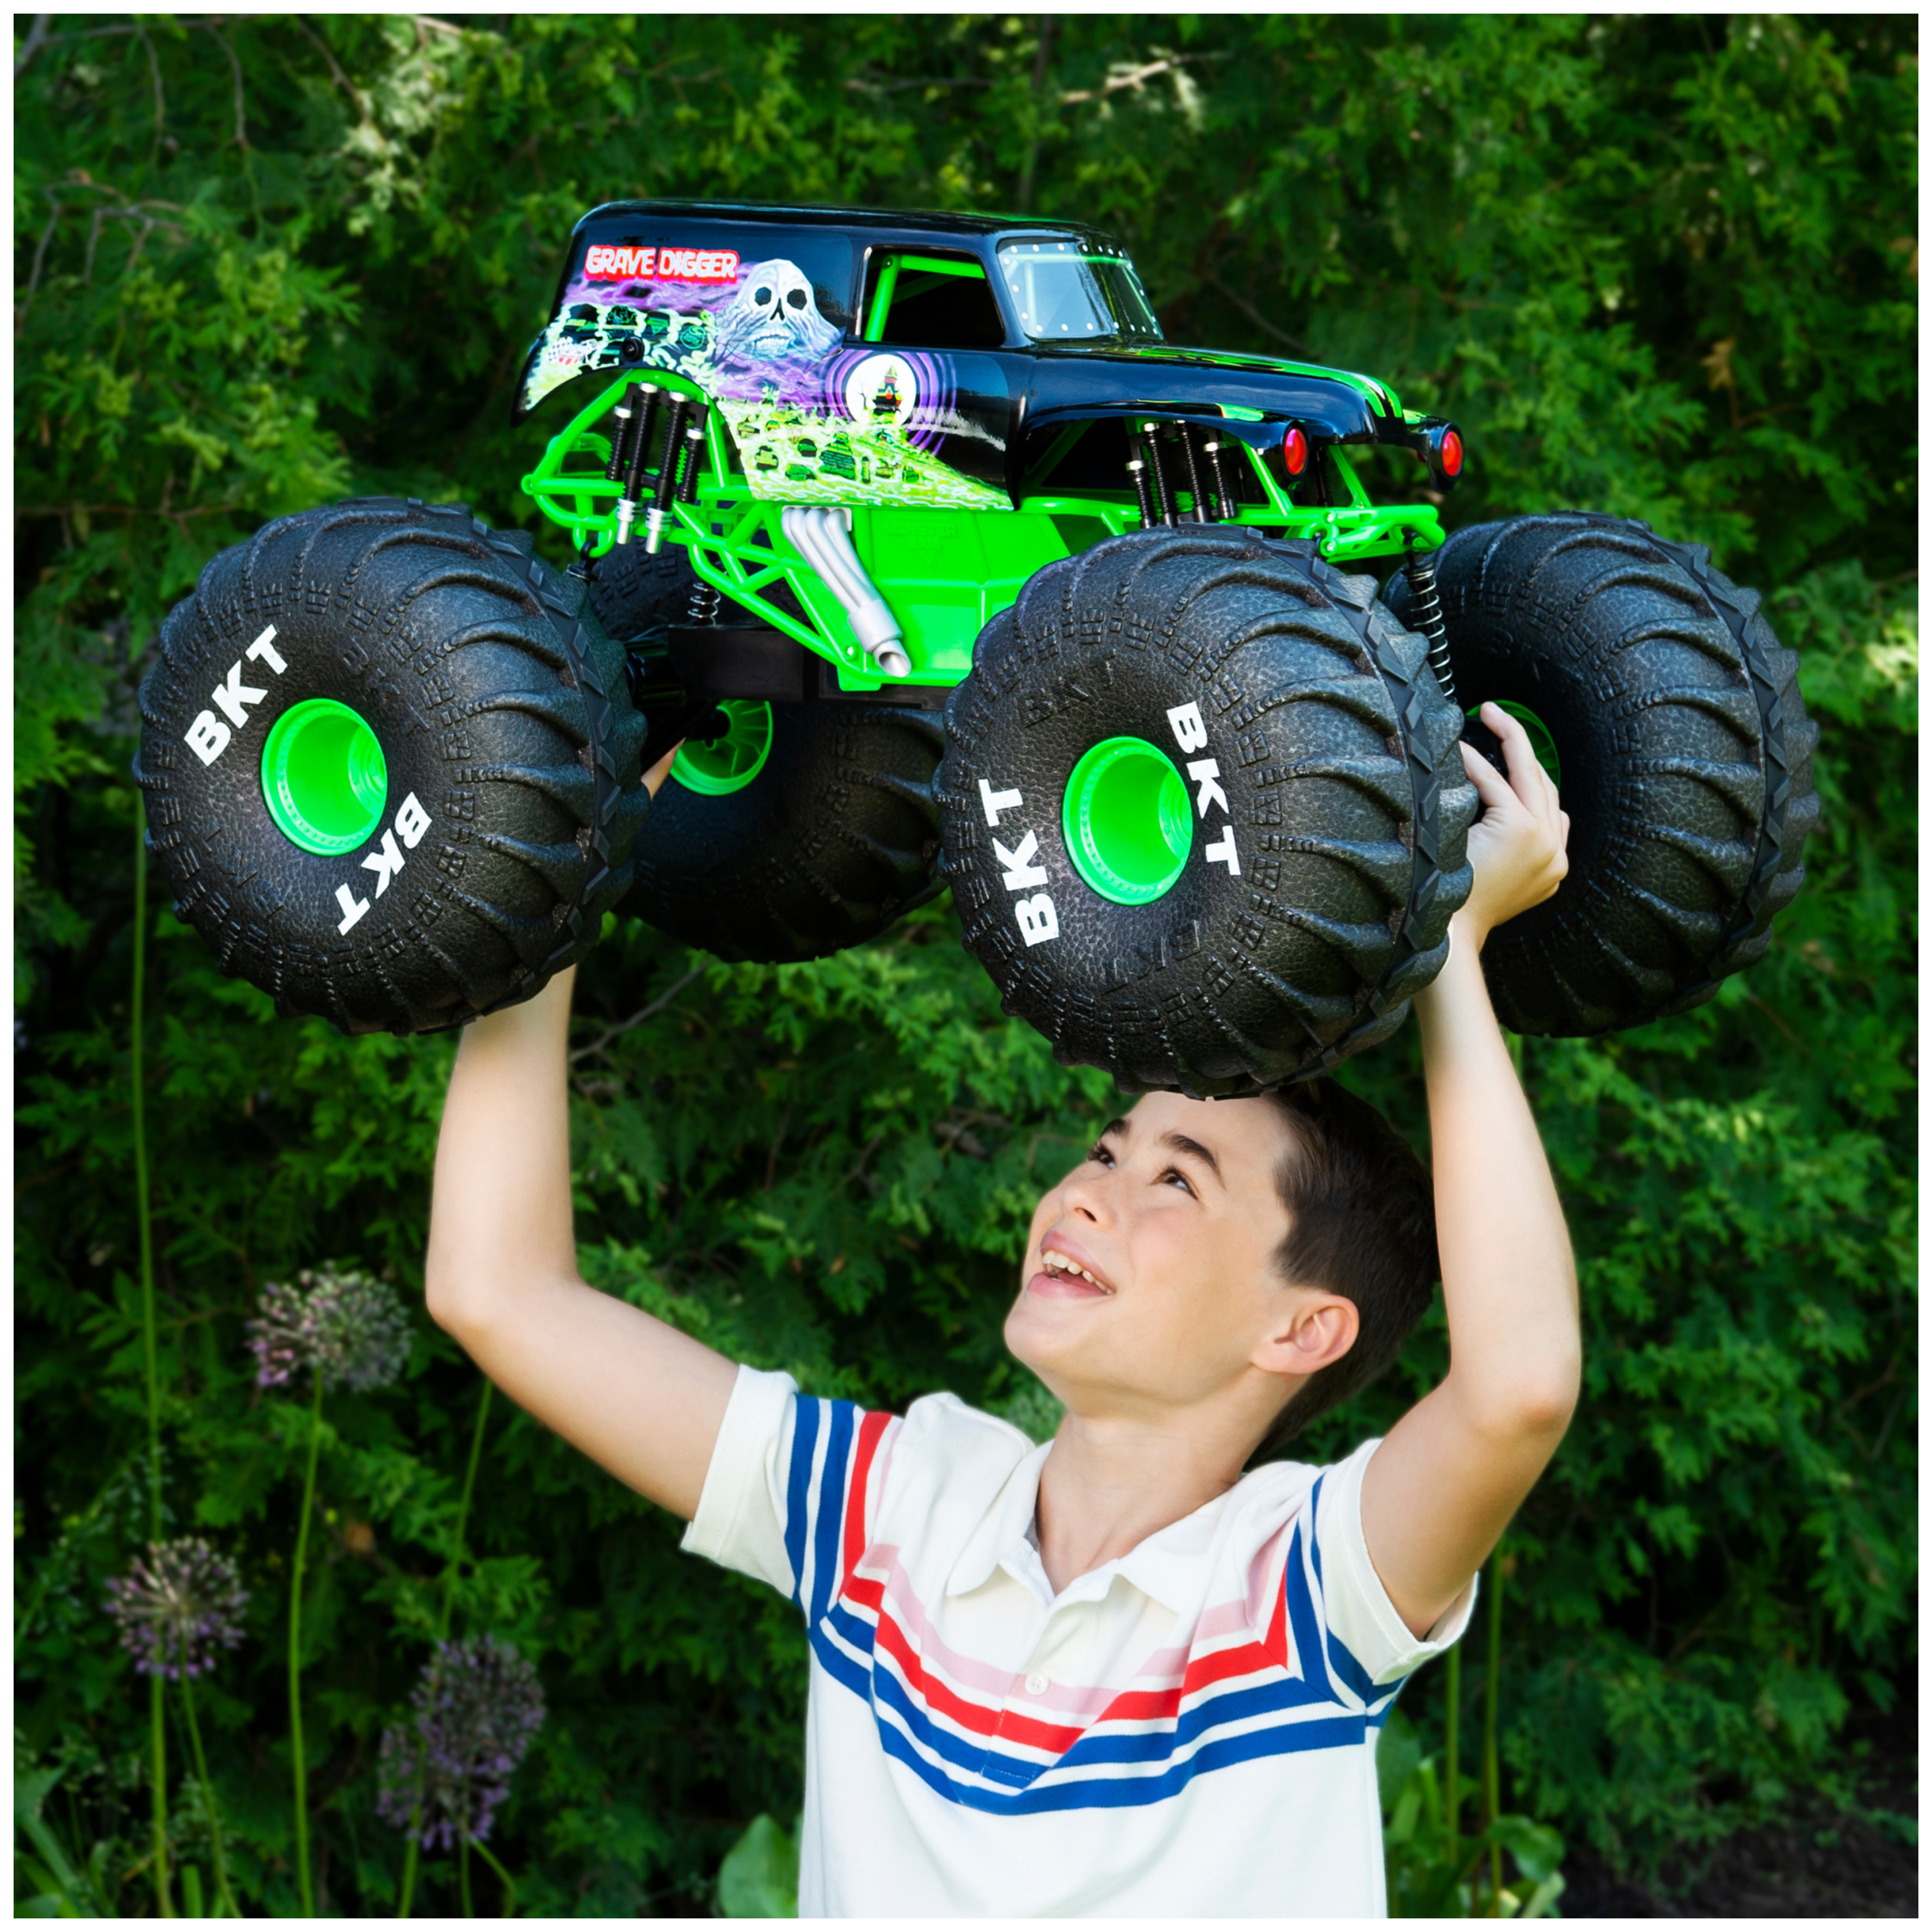 Monster Jam, Official Mega Grave Digger All-Terrain Remote Control Monster Truck with Lights, 1:6 Scale, Kids Toys for Boys and Girls Ages 4-6+  - image 5 of 9